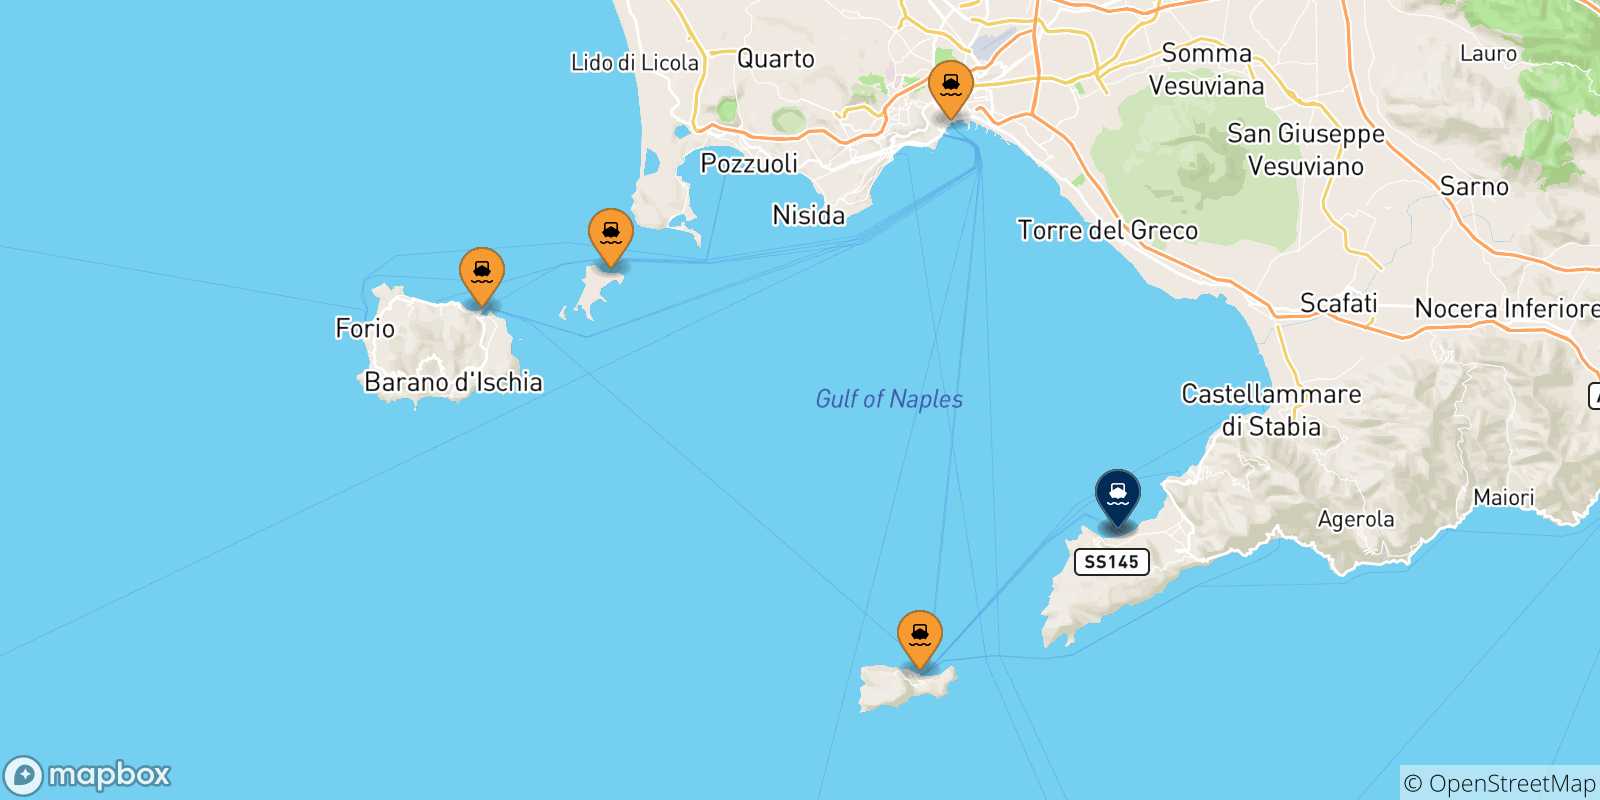 Map of the possible routes between Italy and Sorrento